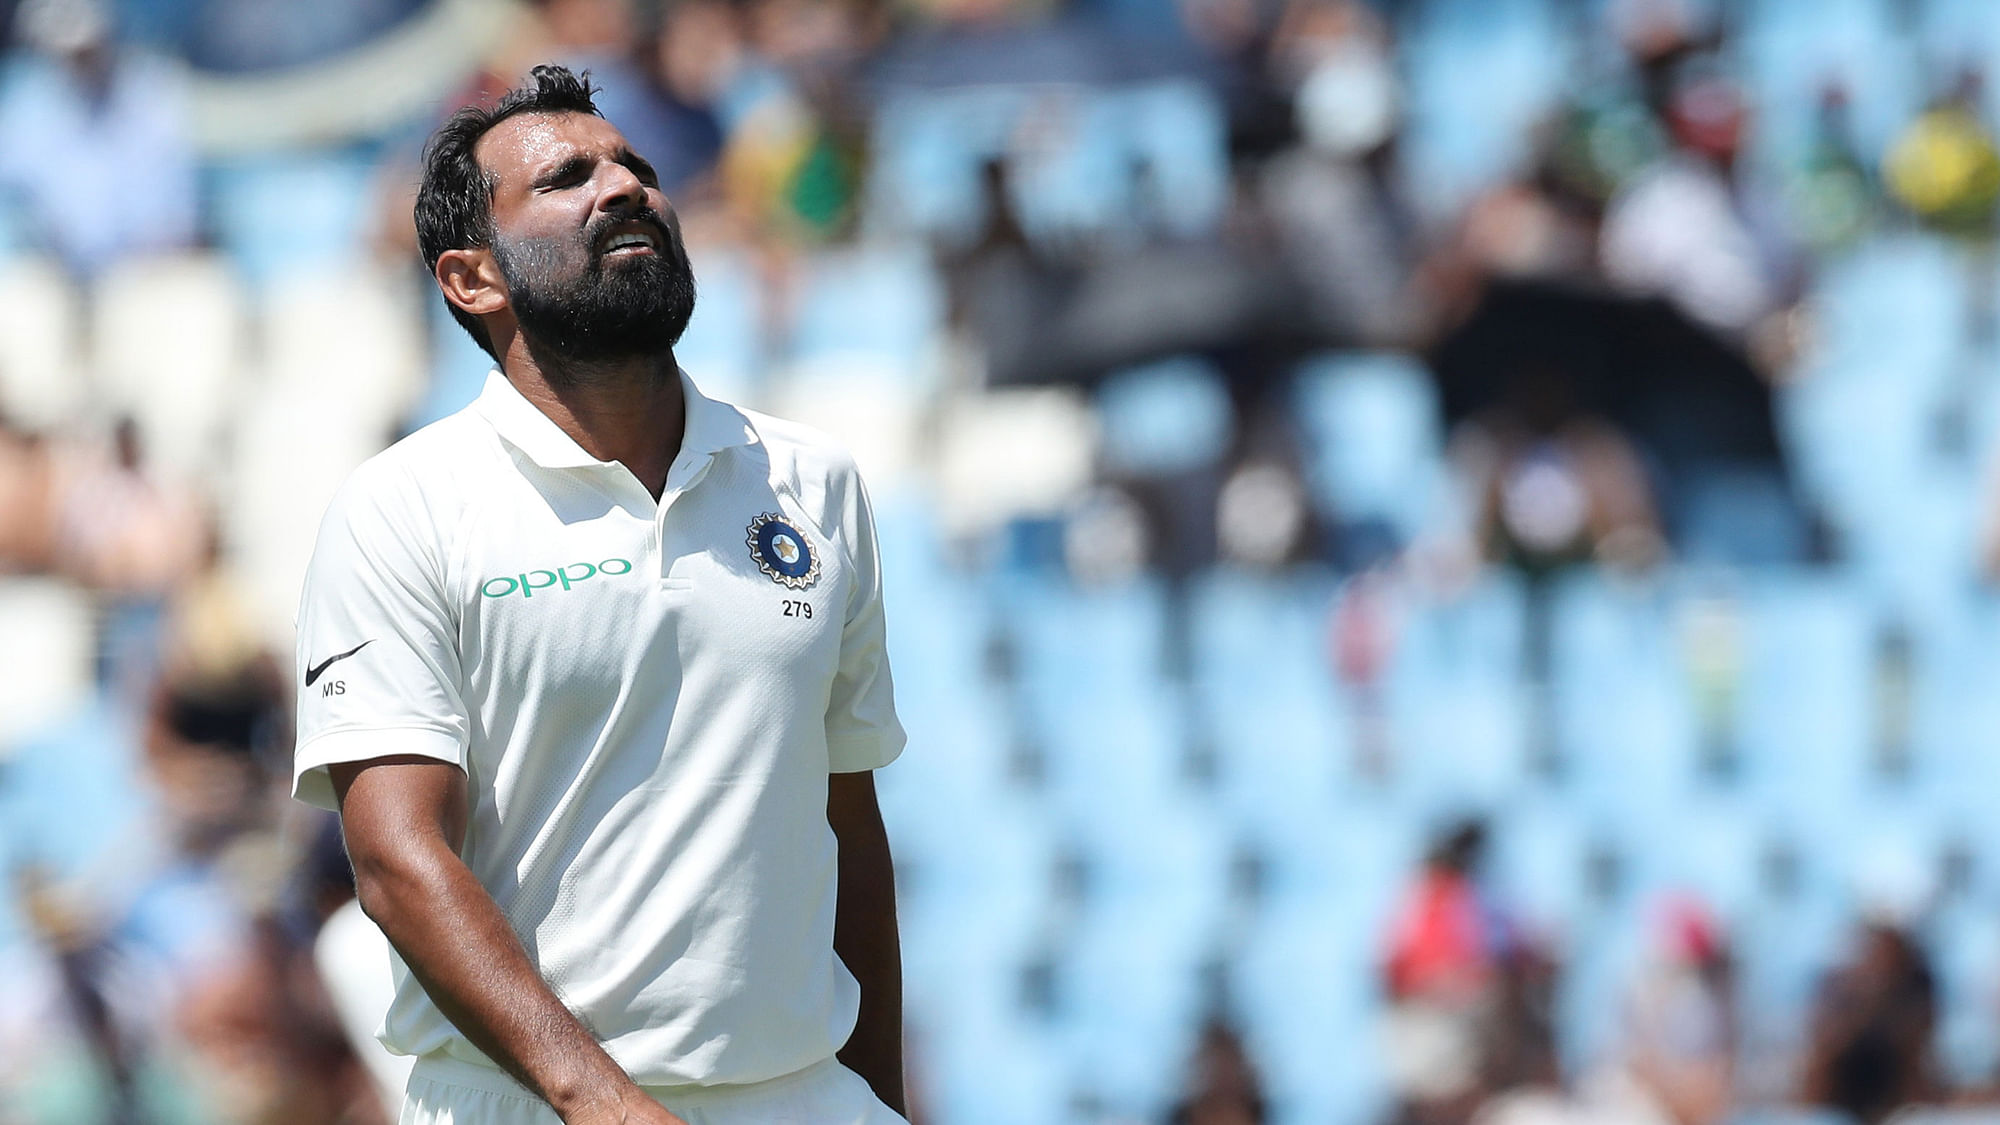 COA chairman has instructed BCCI’s ACU chief to probe the corruption allegations laid against cricketer Mohammad Shami.